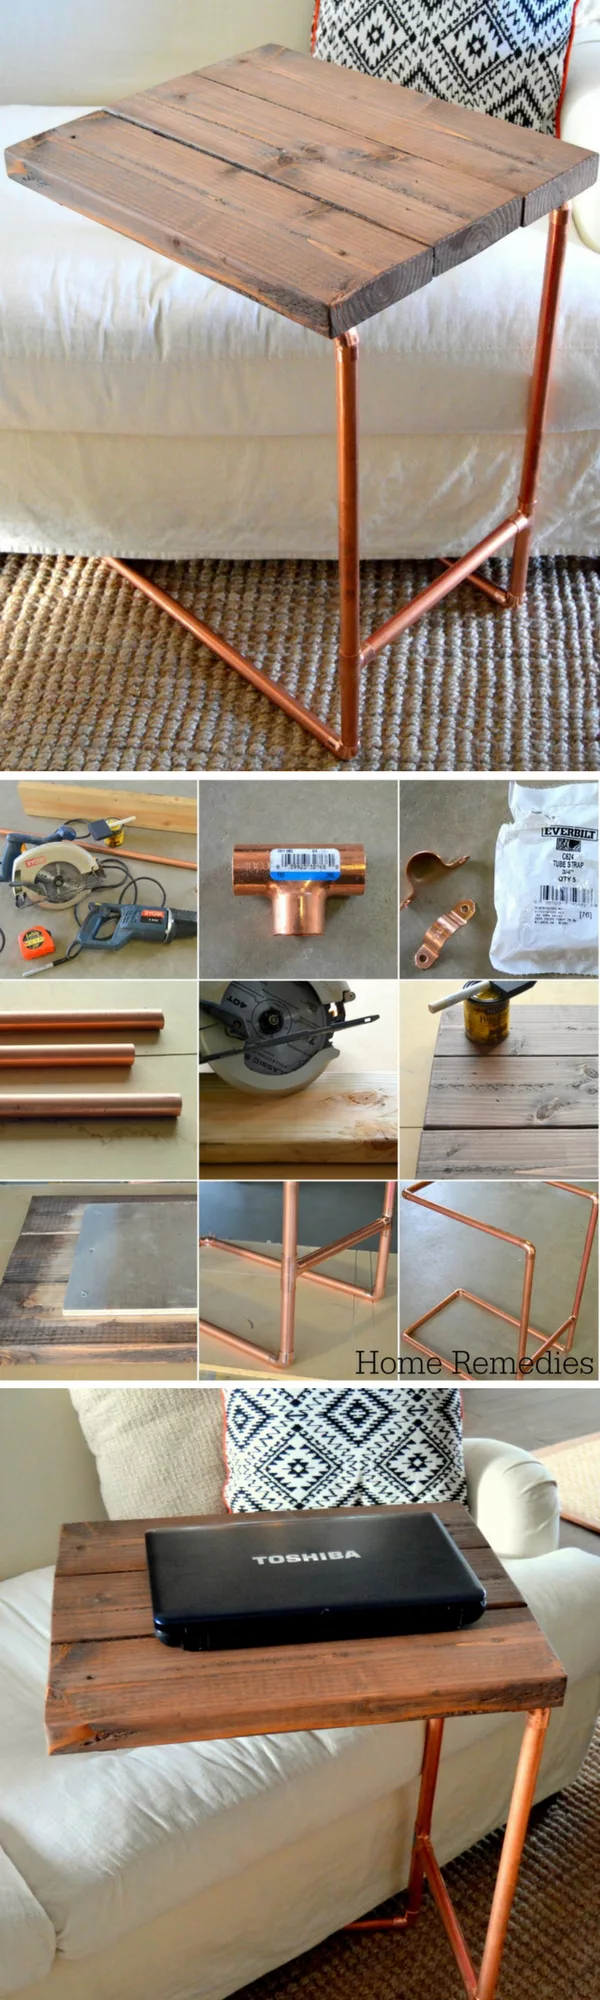 18 Easy DIY Sofa Side Tables You Can Build on a Budget - Check out the tutorial how make a DIY a metal pipe laptop sofa side table